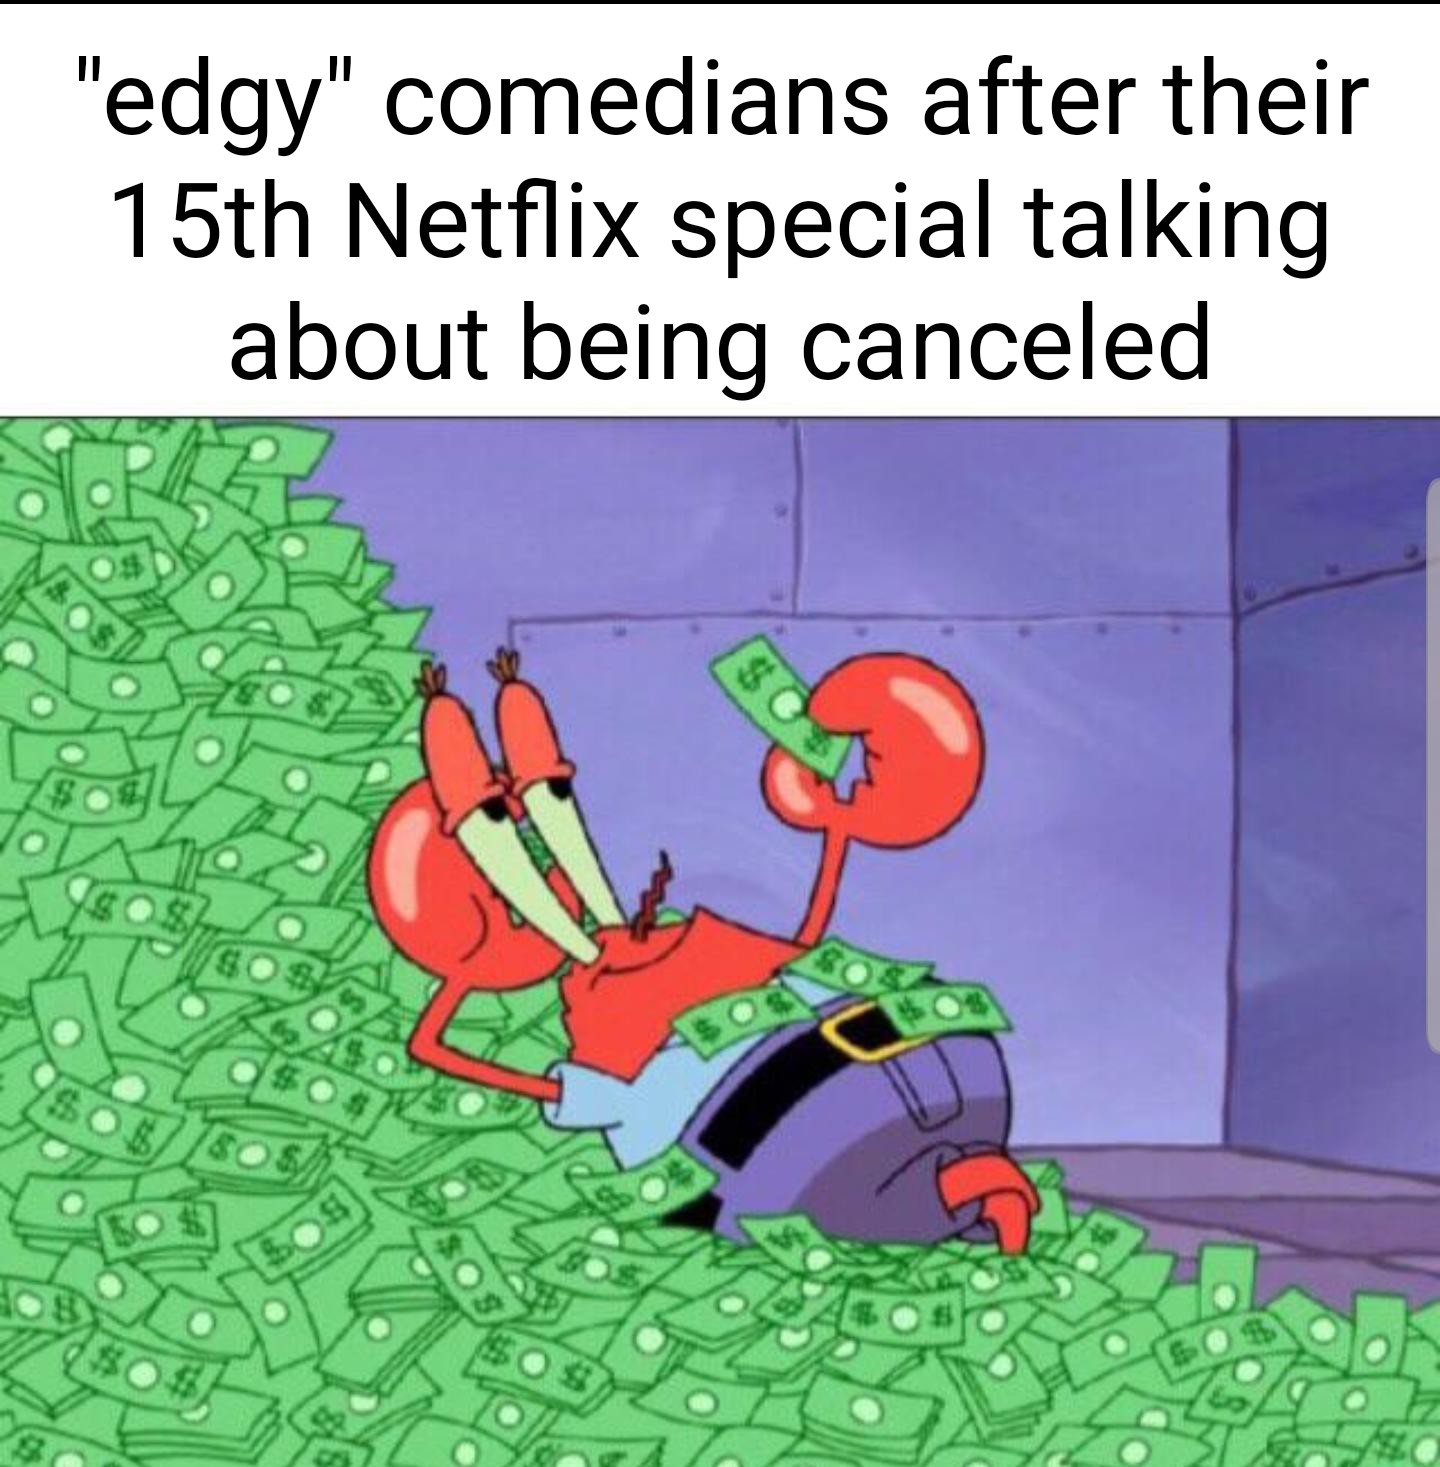 funny memes and pics - could be better than having kids silence - "edgy" comedians after their 15th Netflix special talking about being canceled $0$